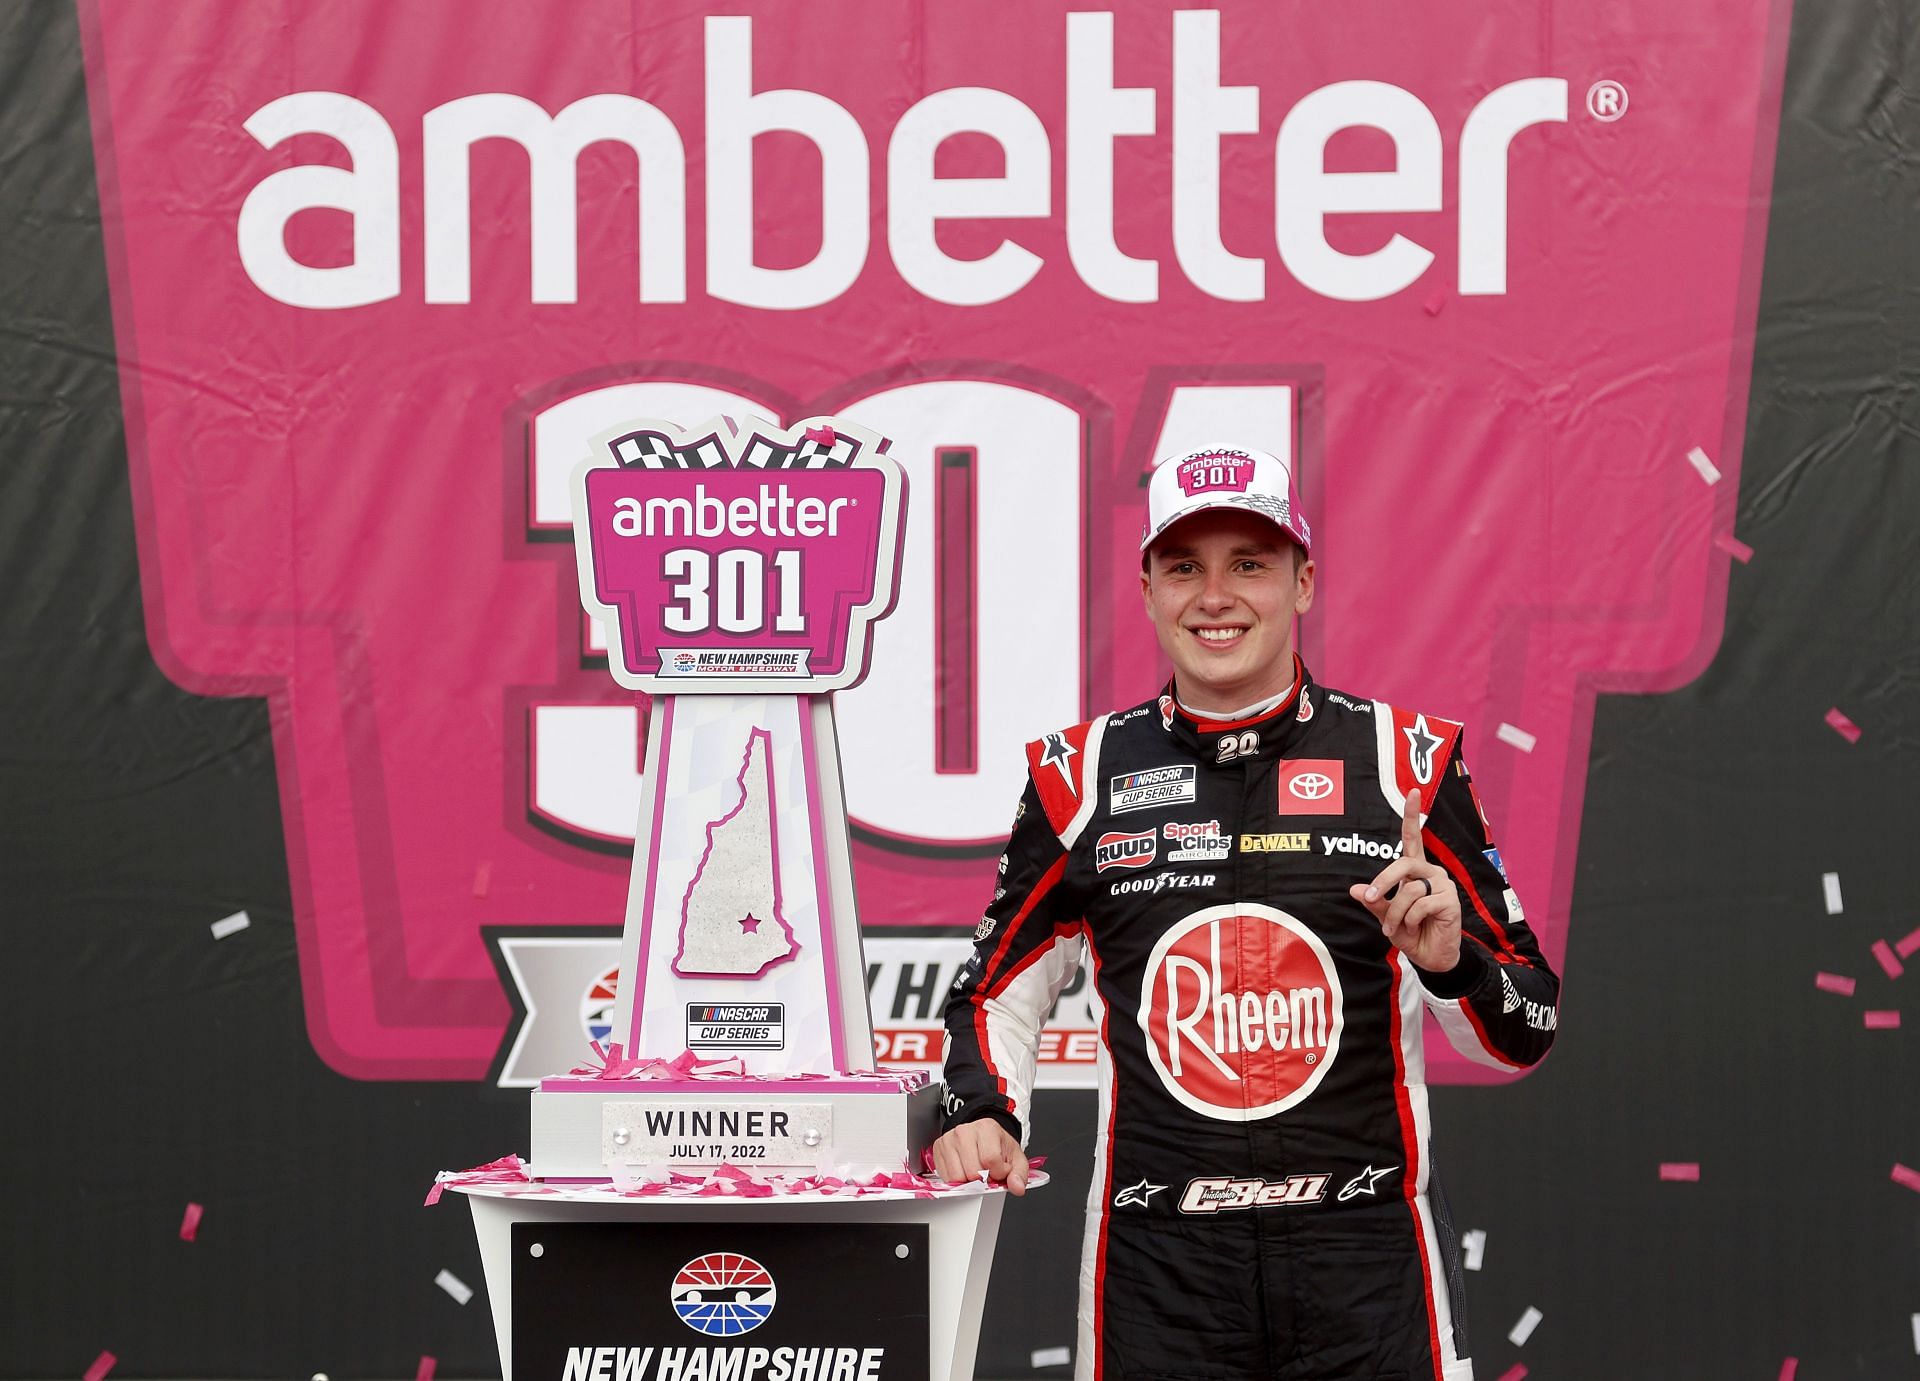 Christopher Bell celebrates in victory lane after winning the NASCAR Cup Series Ambetter 301 at New Hampshire Motor Speedway (Photo by Tim Nwachukwu/Getty Images)